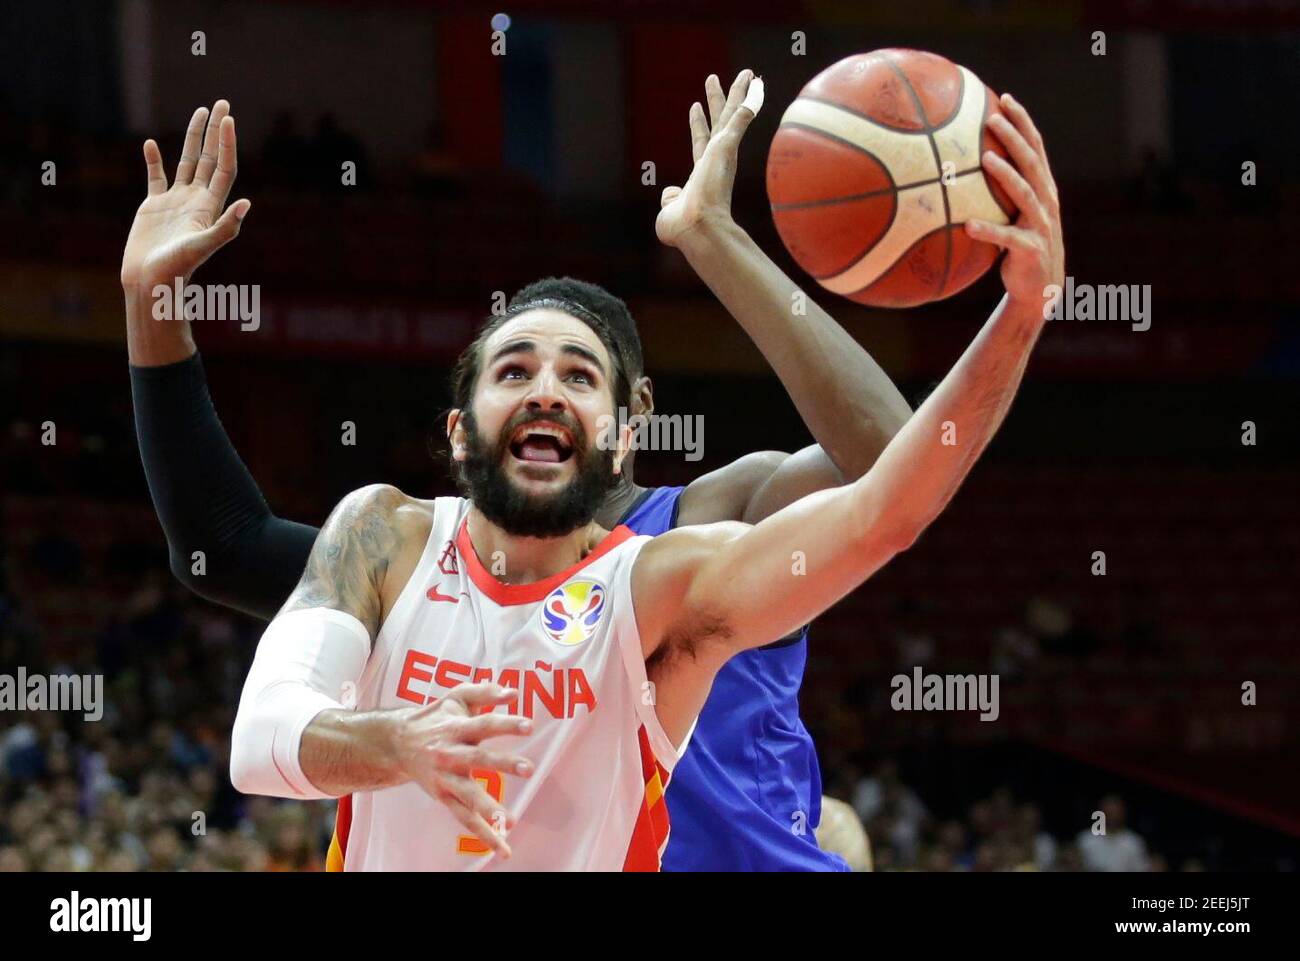 Basketball - FIBA World Cup - Second Round - Group J - Spain v Italy - Wuhan Sports Centre, Wuhan, China - September 6, 2019 Spain's Ricky Rubio in action with Italy's Paul Biligha REUTERS/Jason Lee Stock Photo